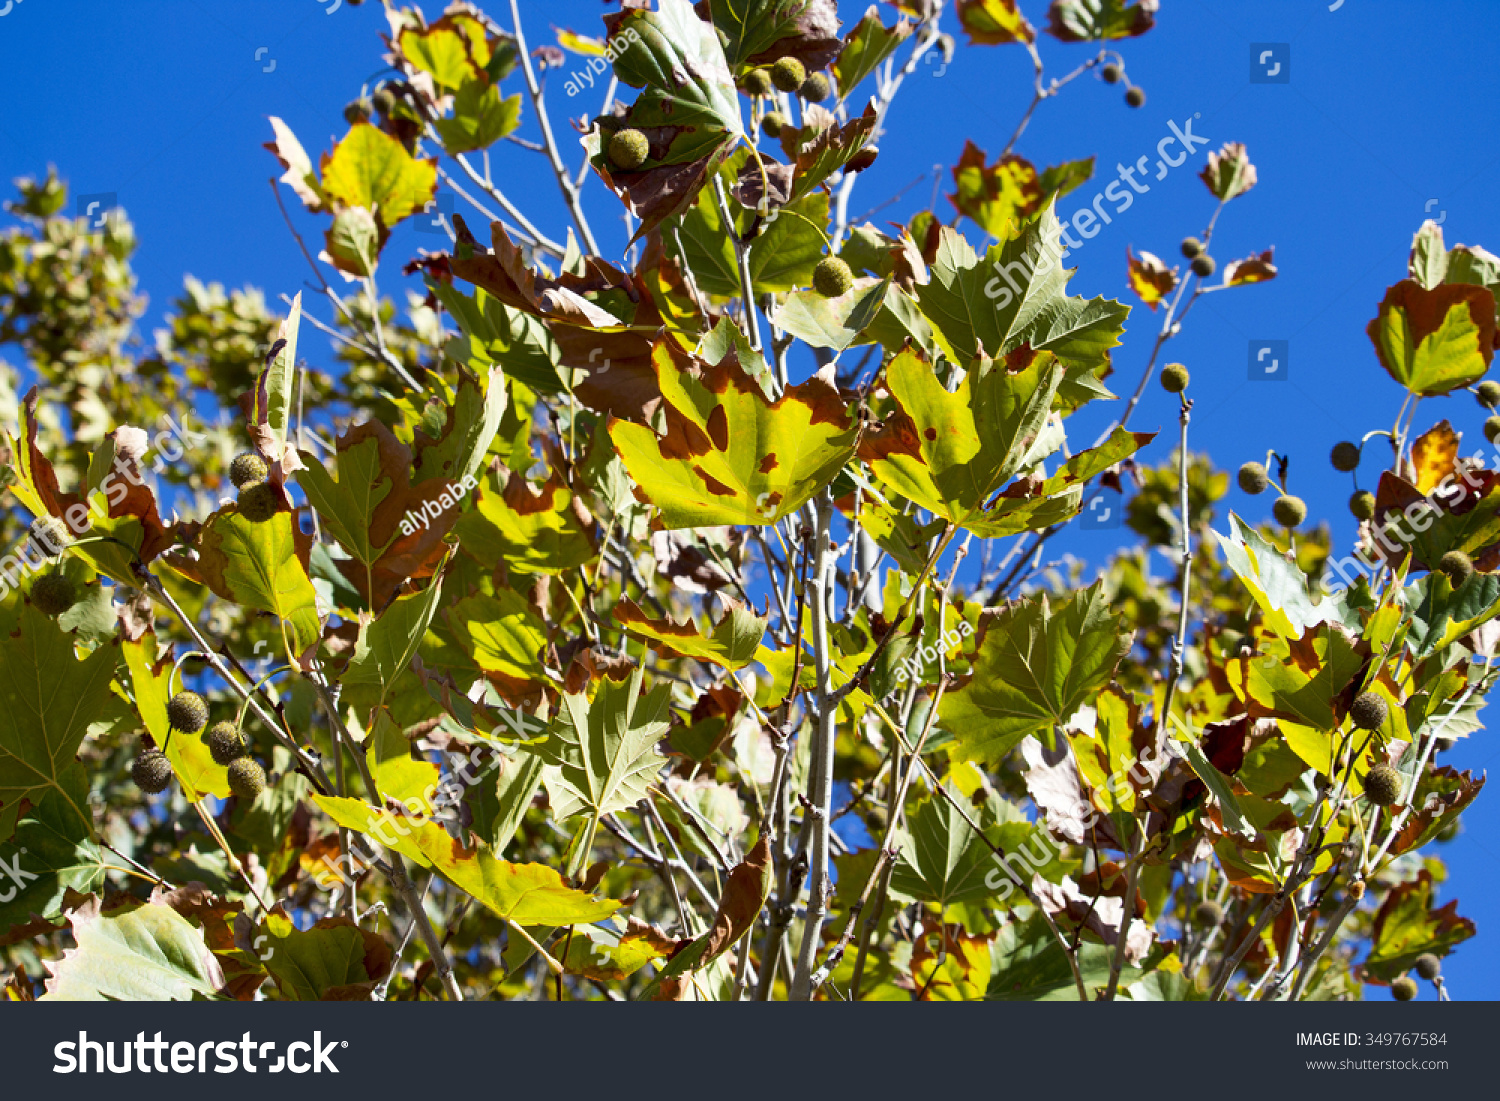 Brilliant  yellow , brown and green  sycamore Platanus occidentalis    foliage of deciduous trees in autumn   add color to the garden and park land scape as the leaves fall carpeting the ground below. #349767584